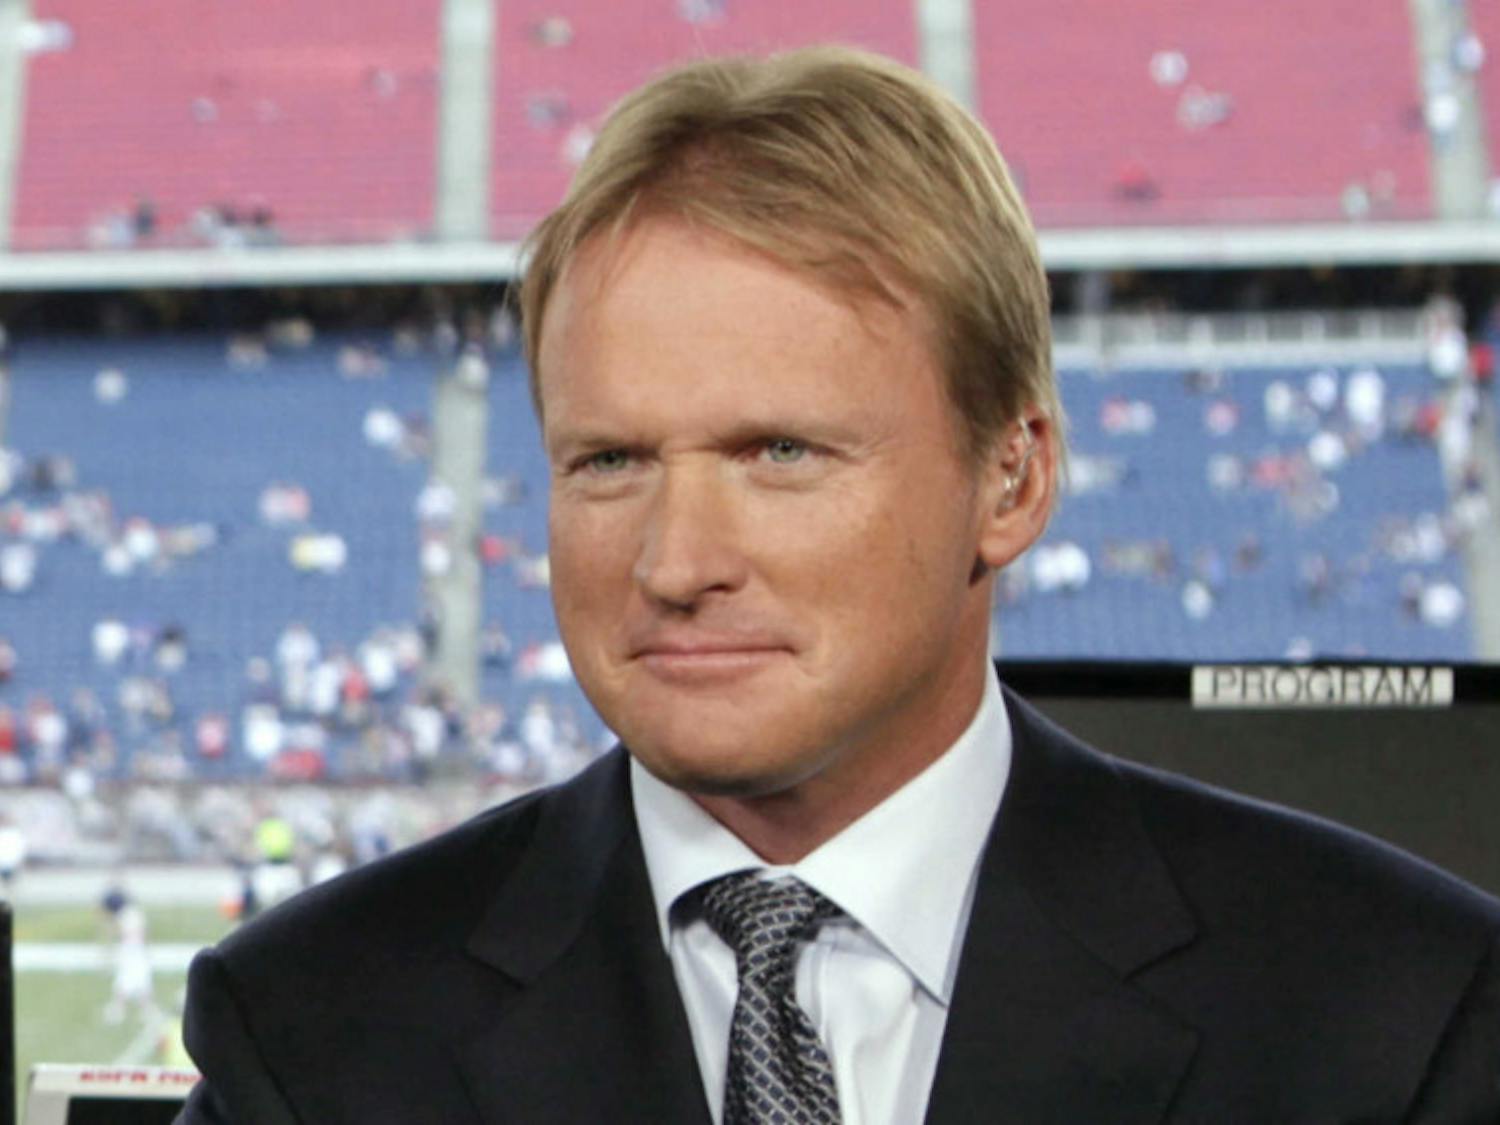 Jon Gruden agreed to a 10-year, $100 million contract with the Oakland Raiders on Saturday, making him the highest-paid coach in NFL history.